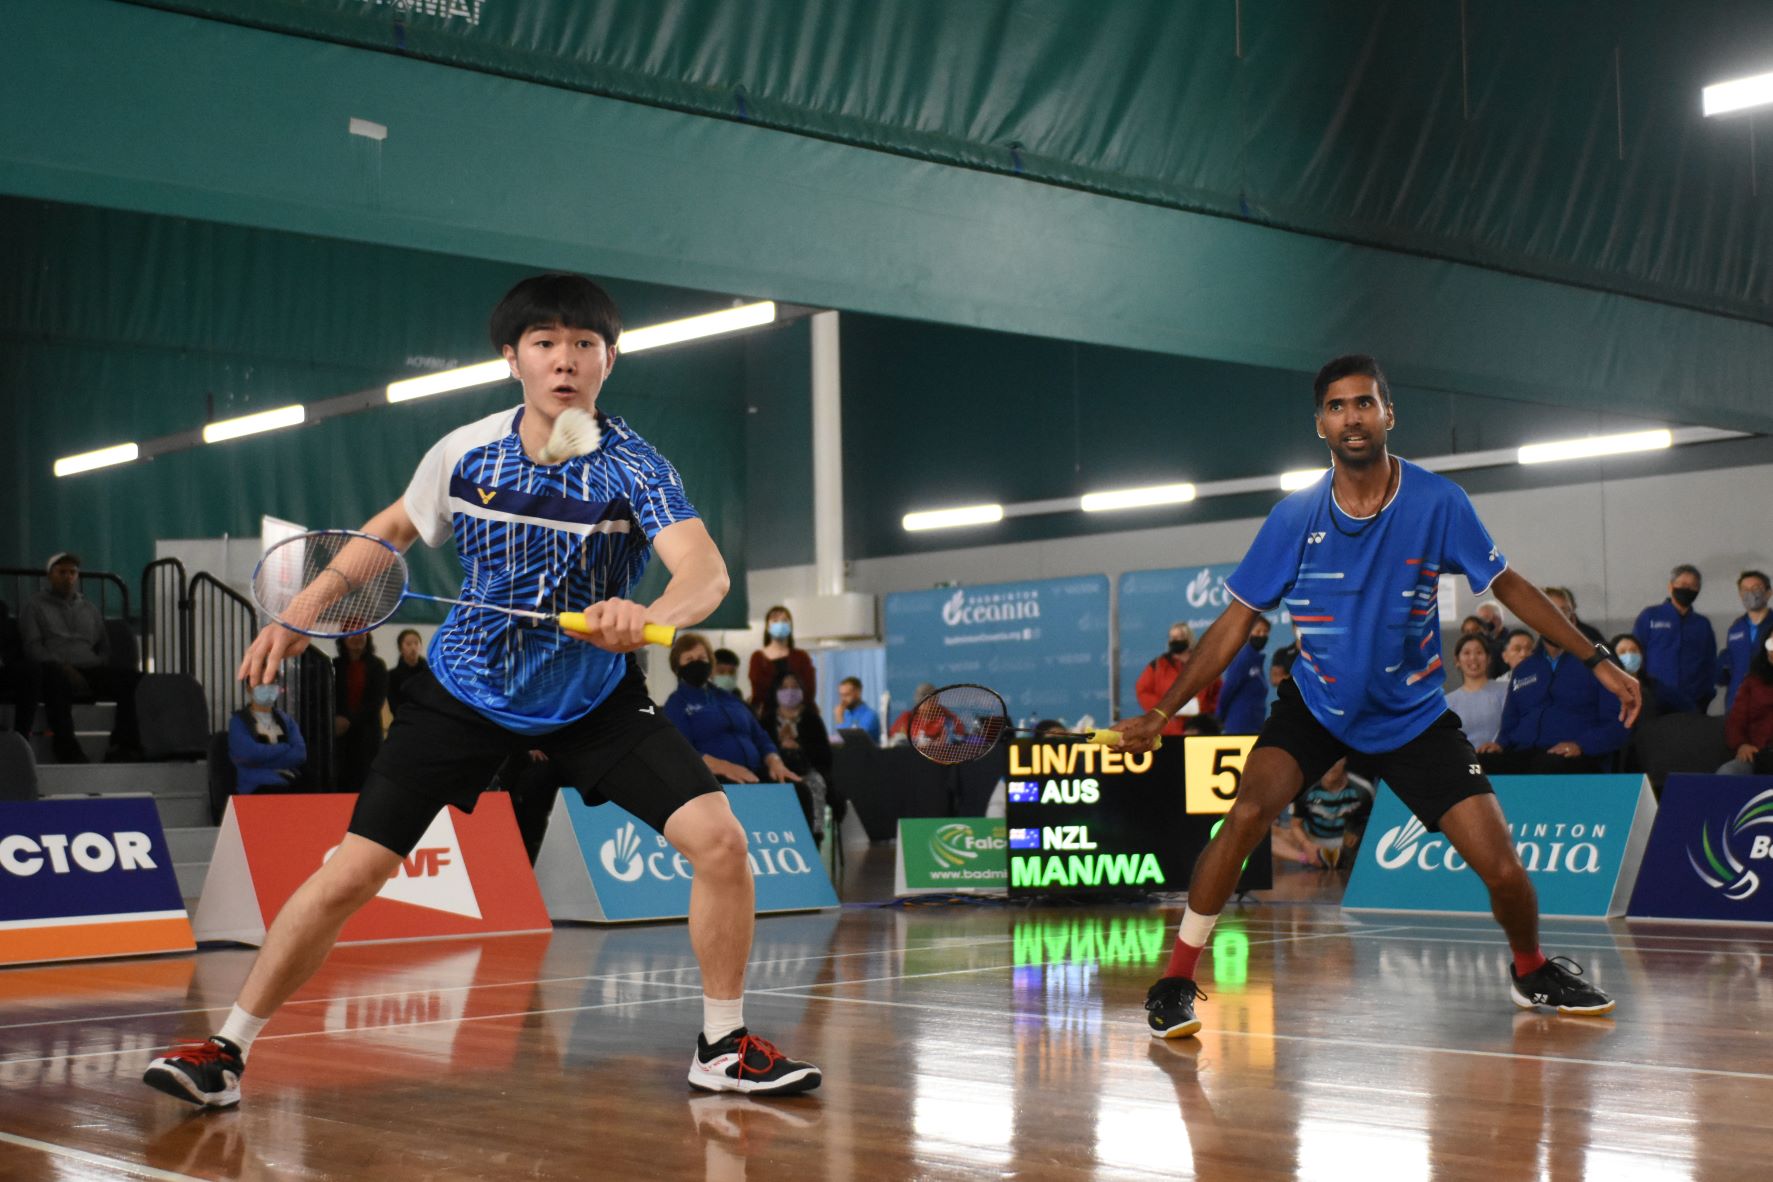 Abhinavs new partnership exceeds expectations, Gronya and Kenneth guaranteed two medals each